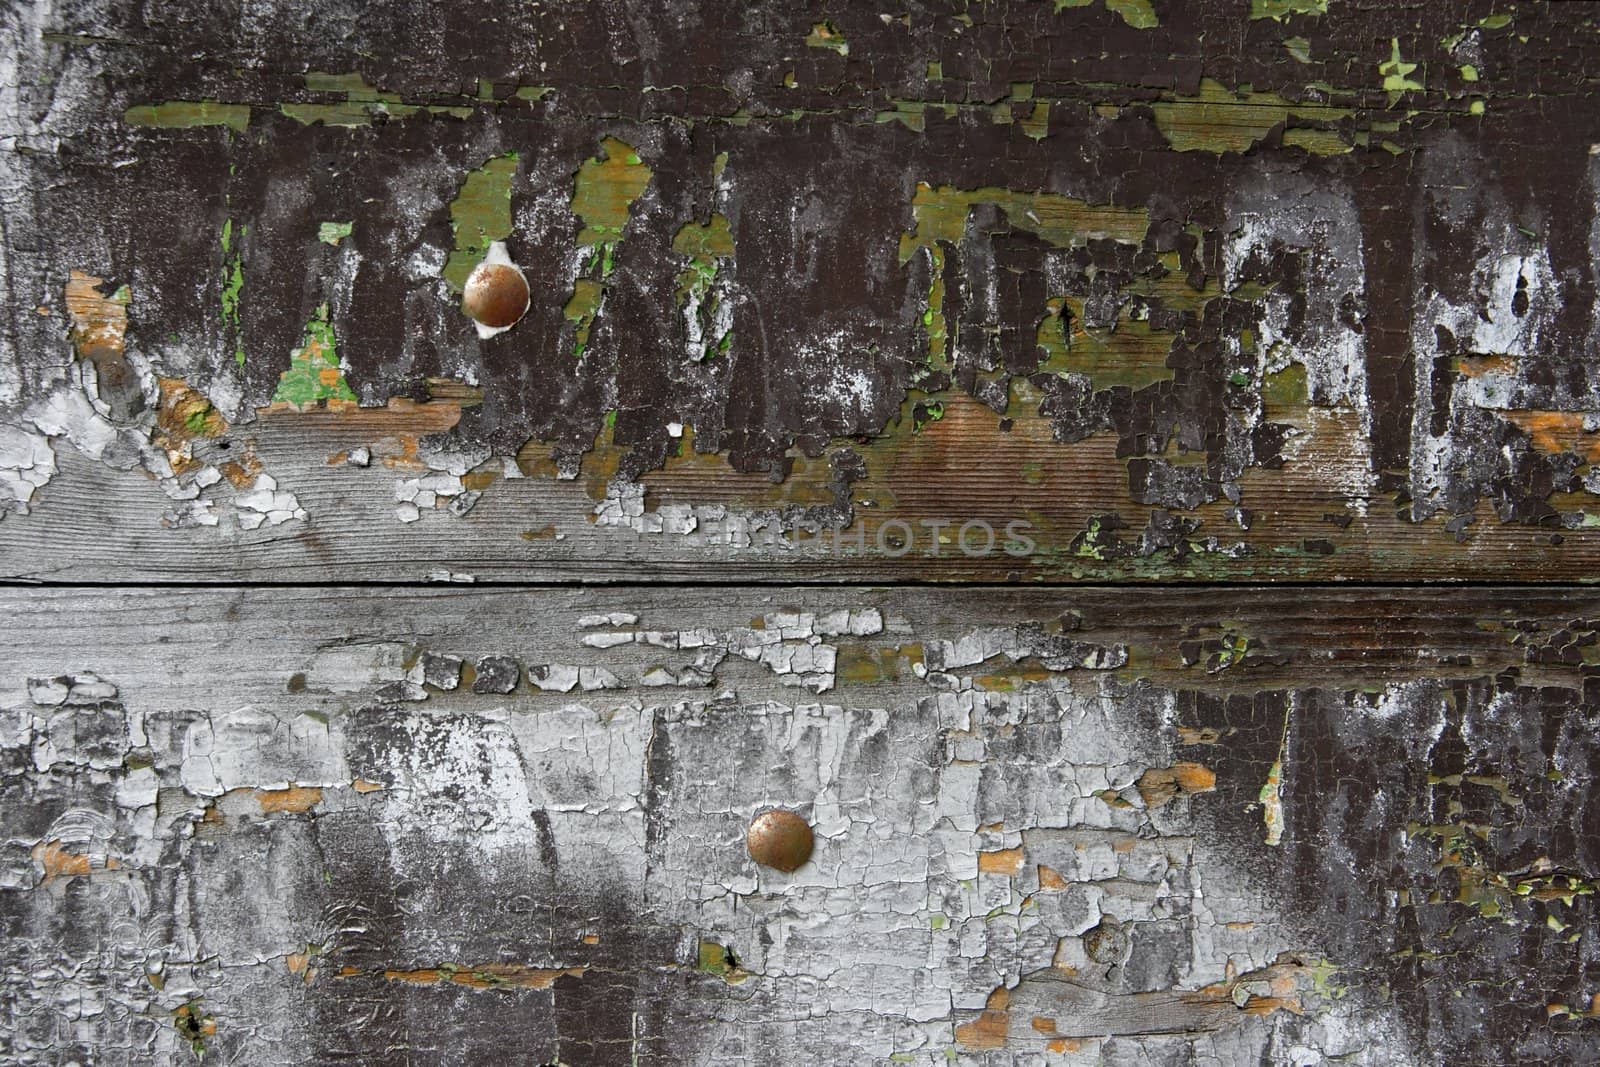 Grainy texture of an old wooden structure, with painting falling apart